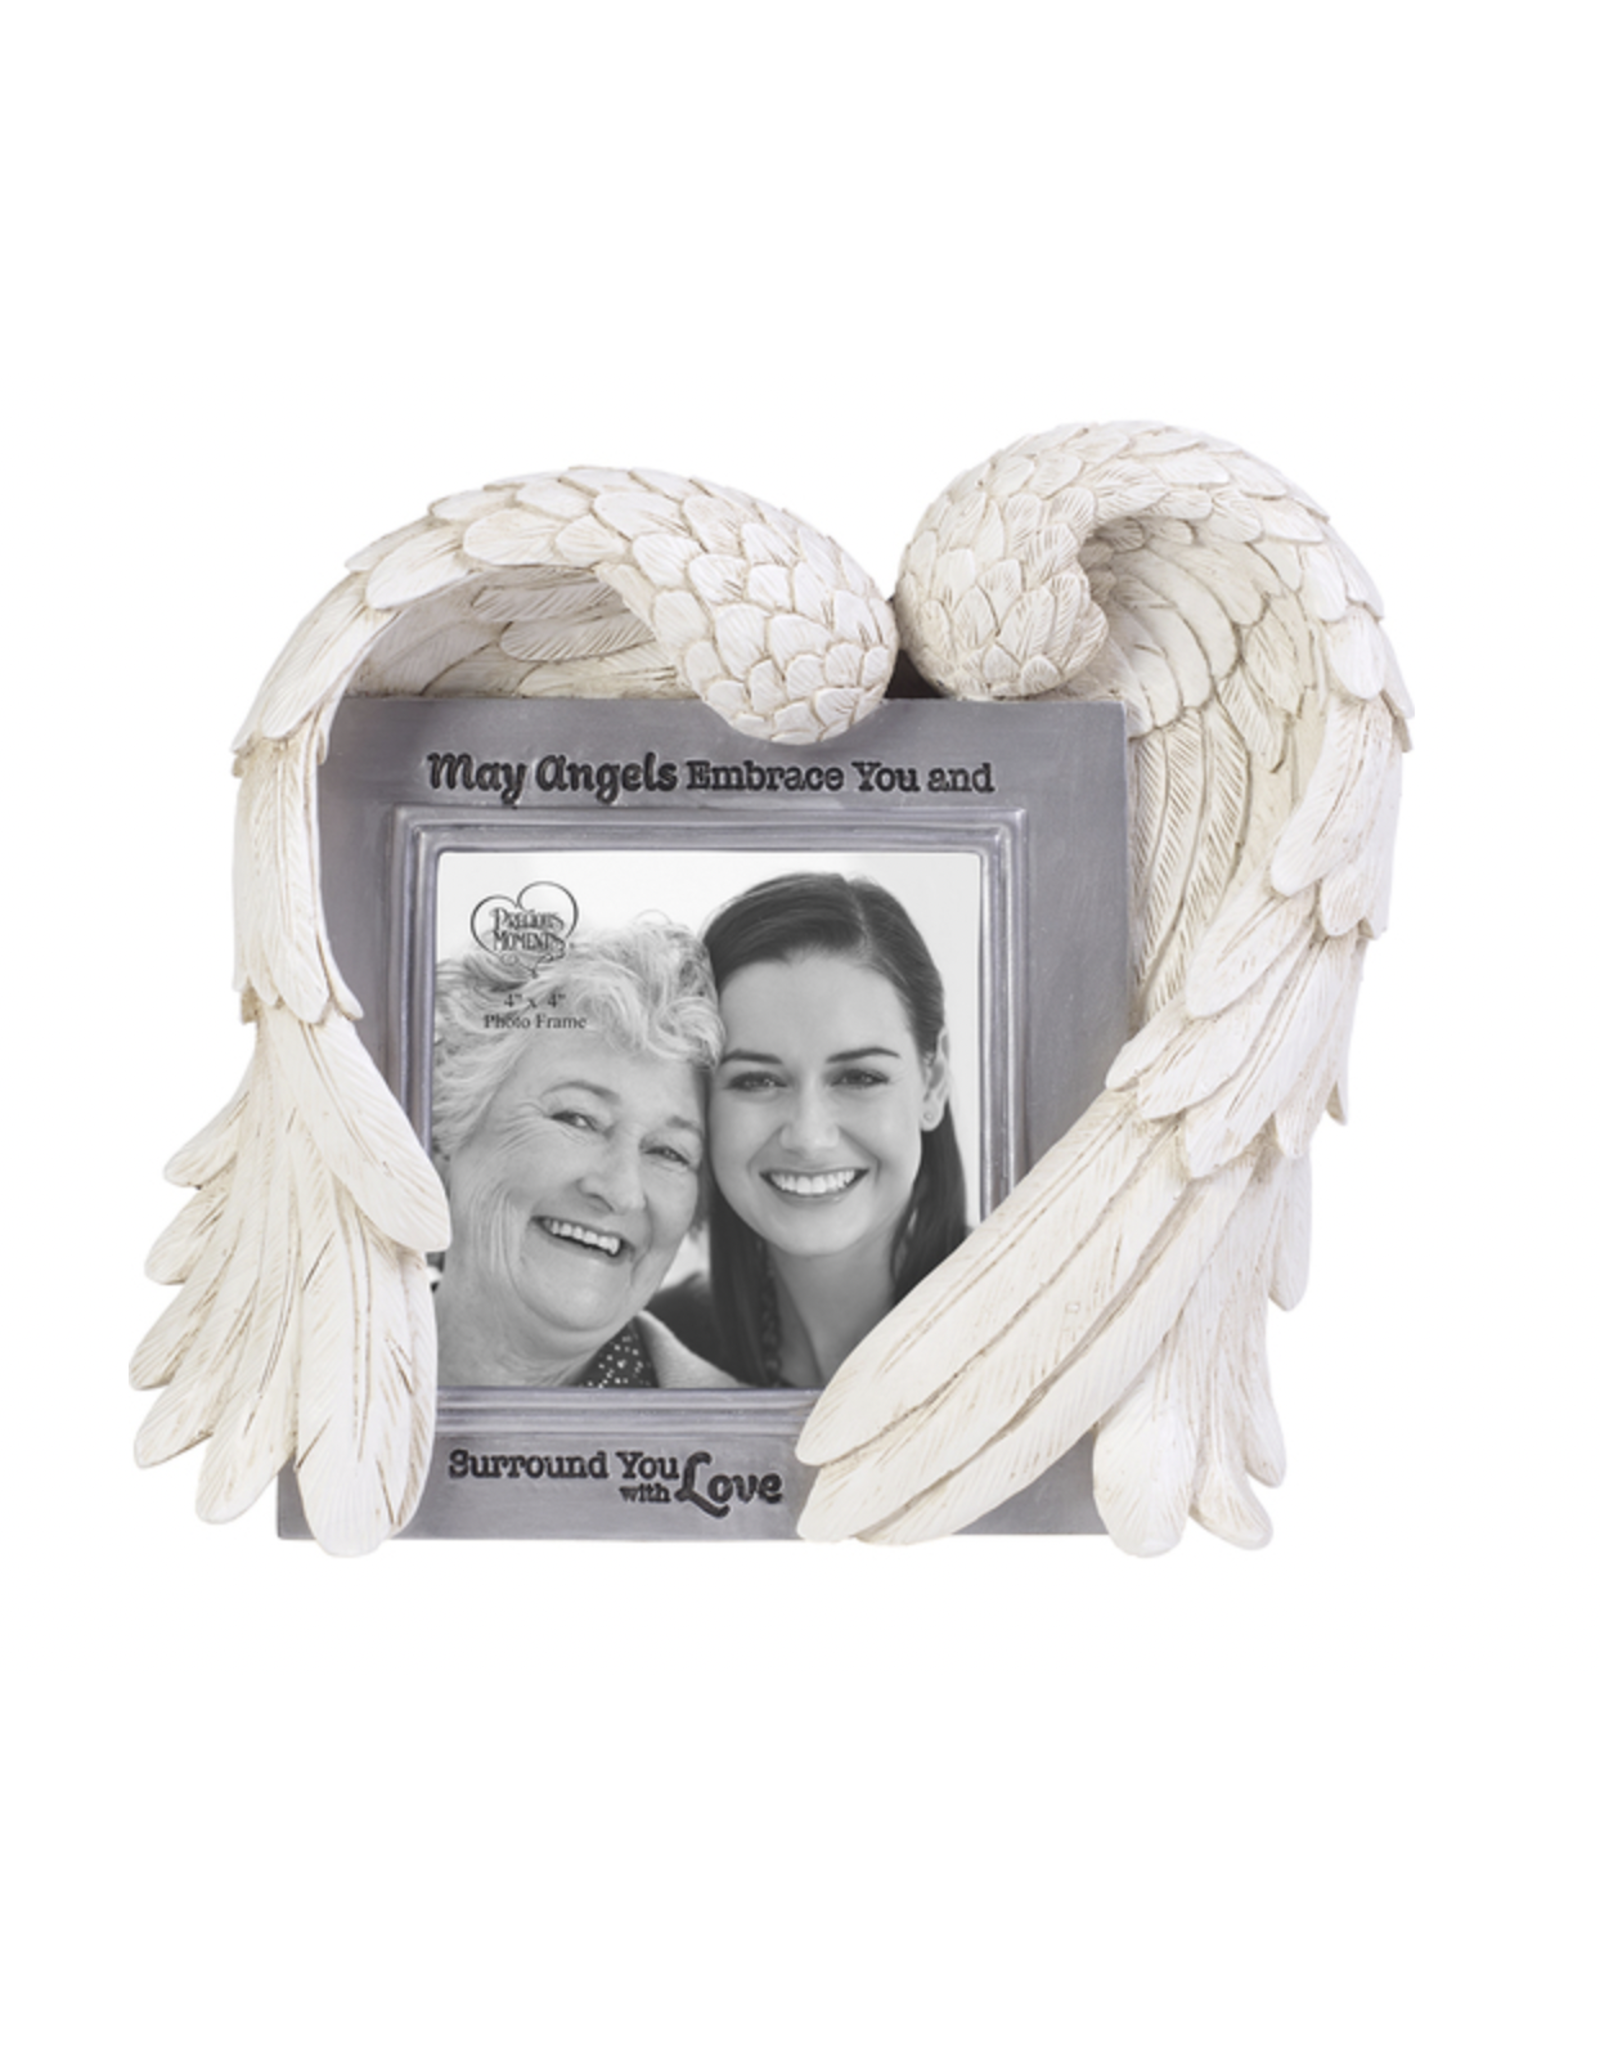 Precious Moments Precious Moments - May Angels Embrace You Memorial Picture Frame